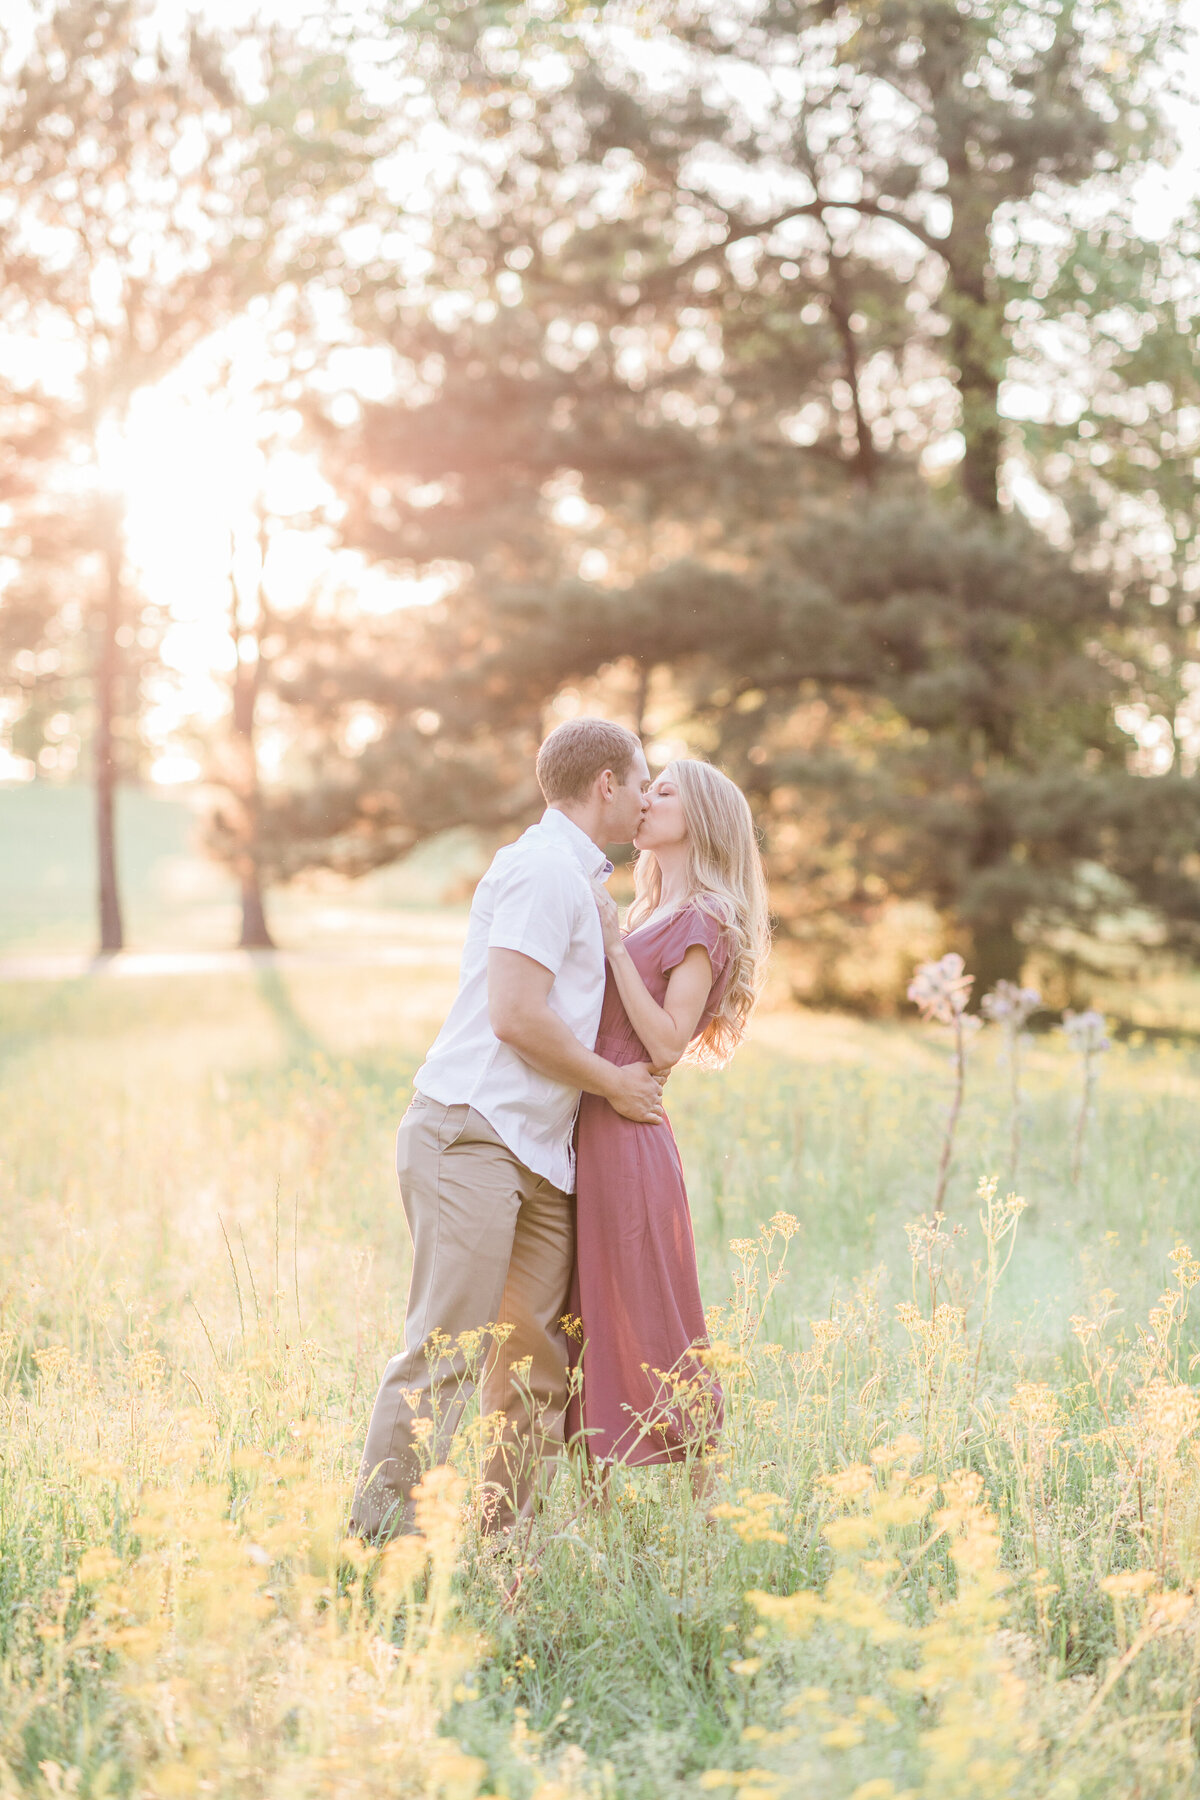 Sunlit Engaged Couple in East Texas